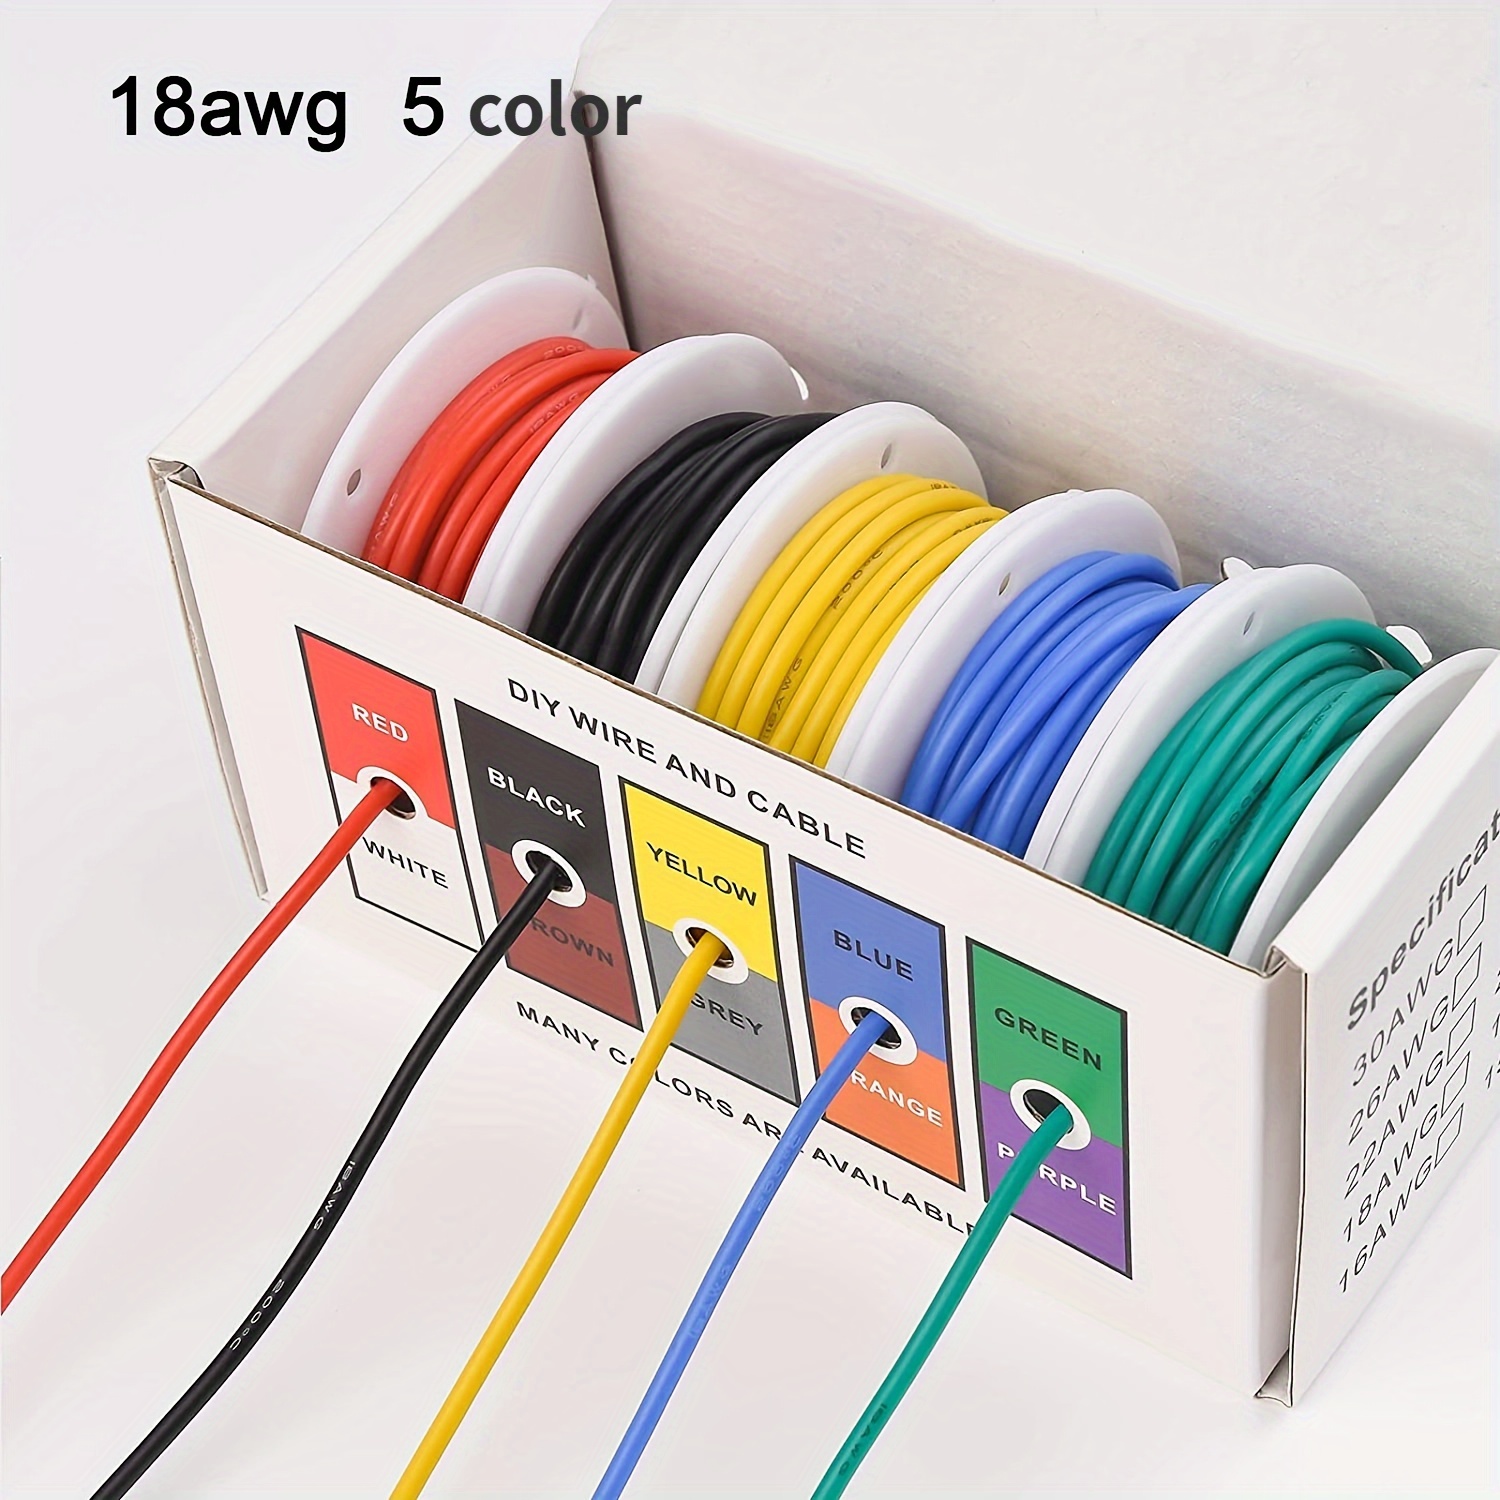 26 awg Electrical Wire Cable PVC Hook up Wires Stranded UL1007 Tinned  Copper Wire Breadboard Wire Flexible and Soft for Electronics DIY - 10  Colors